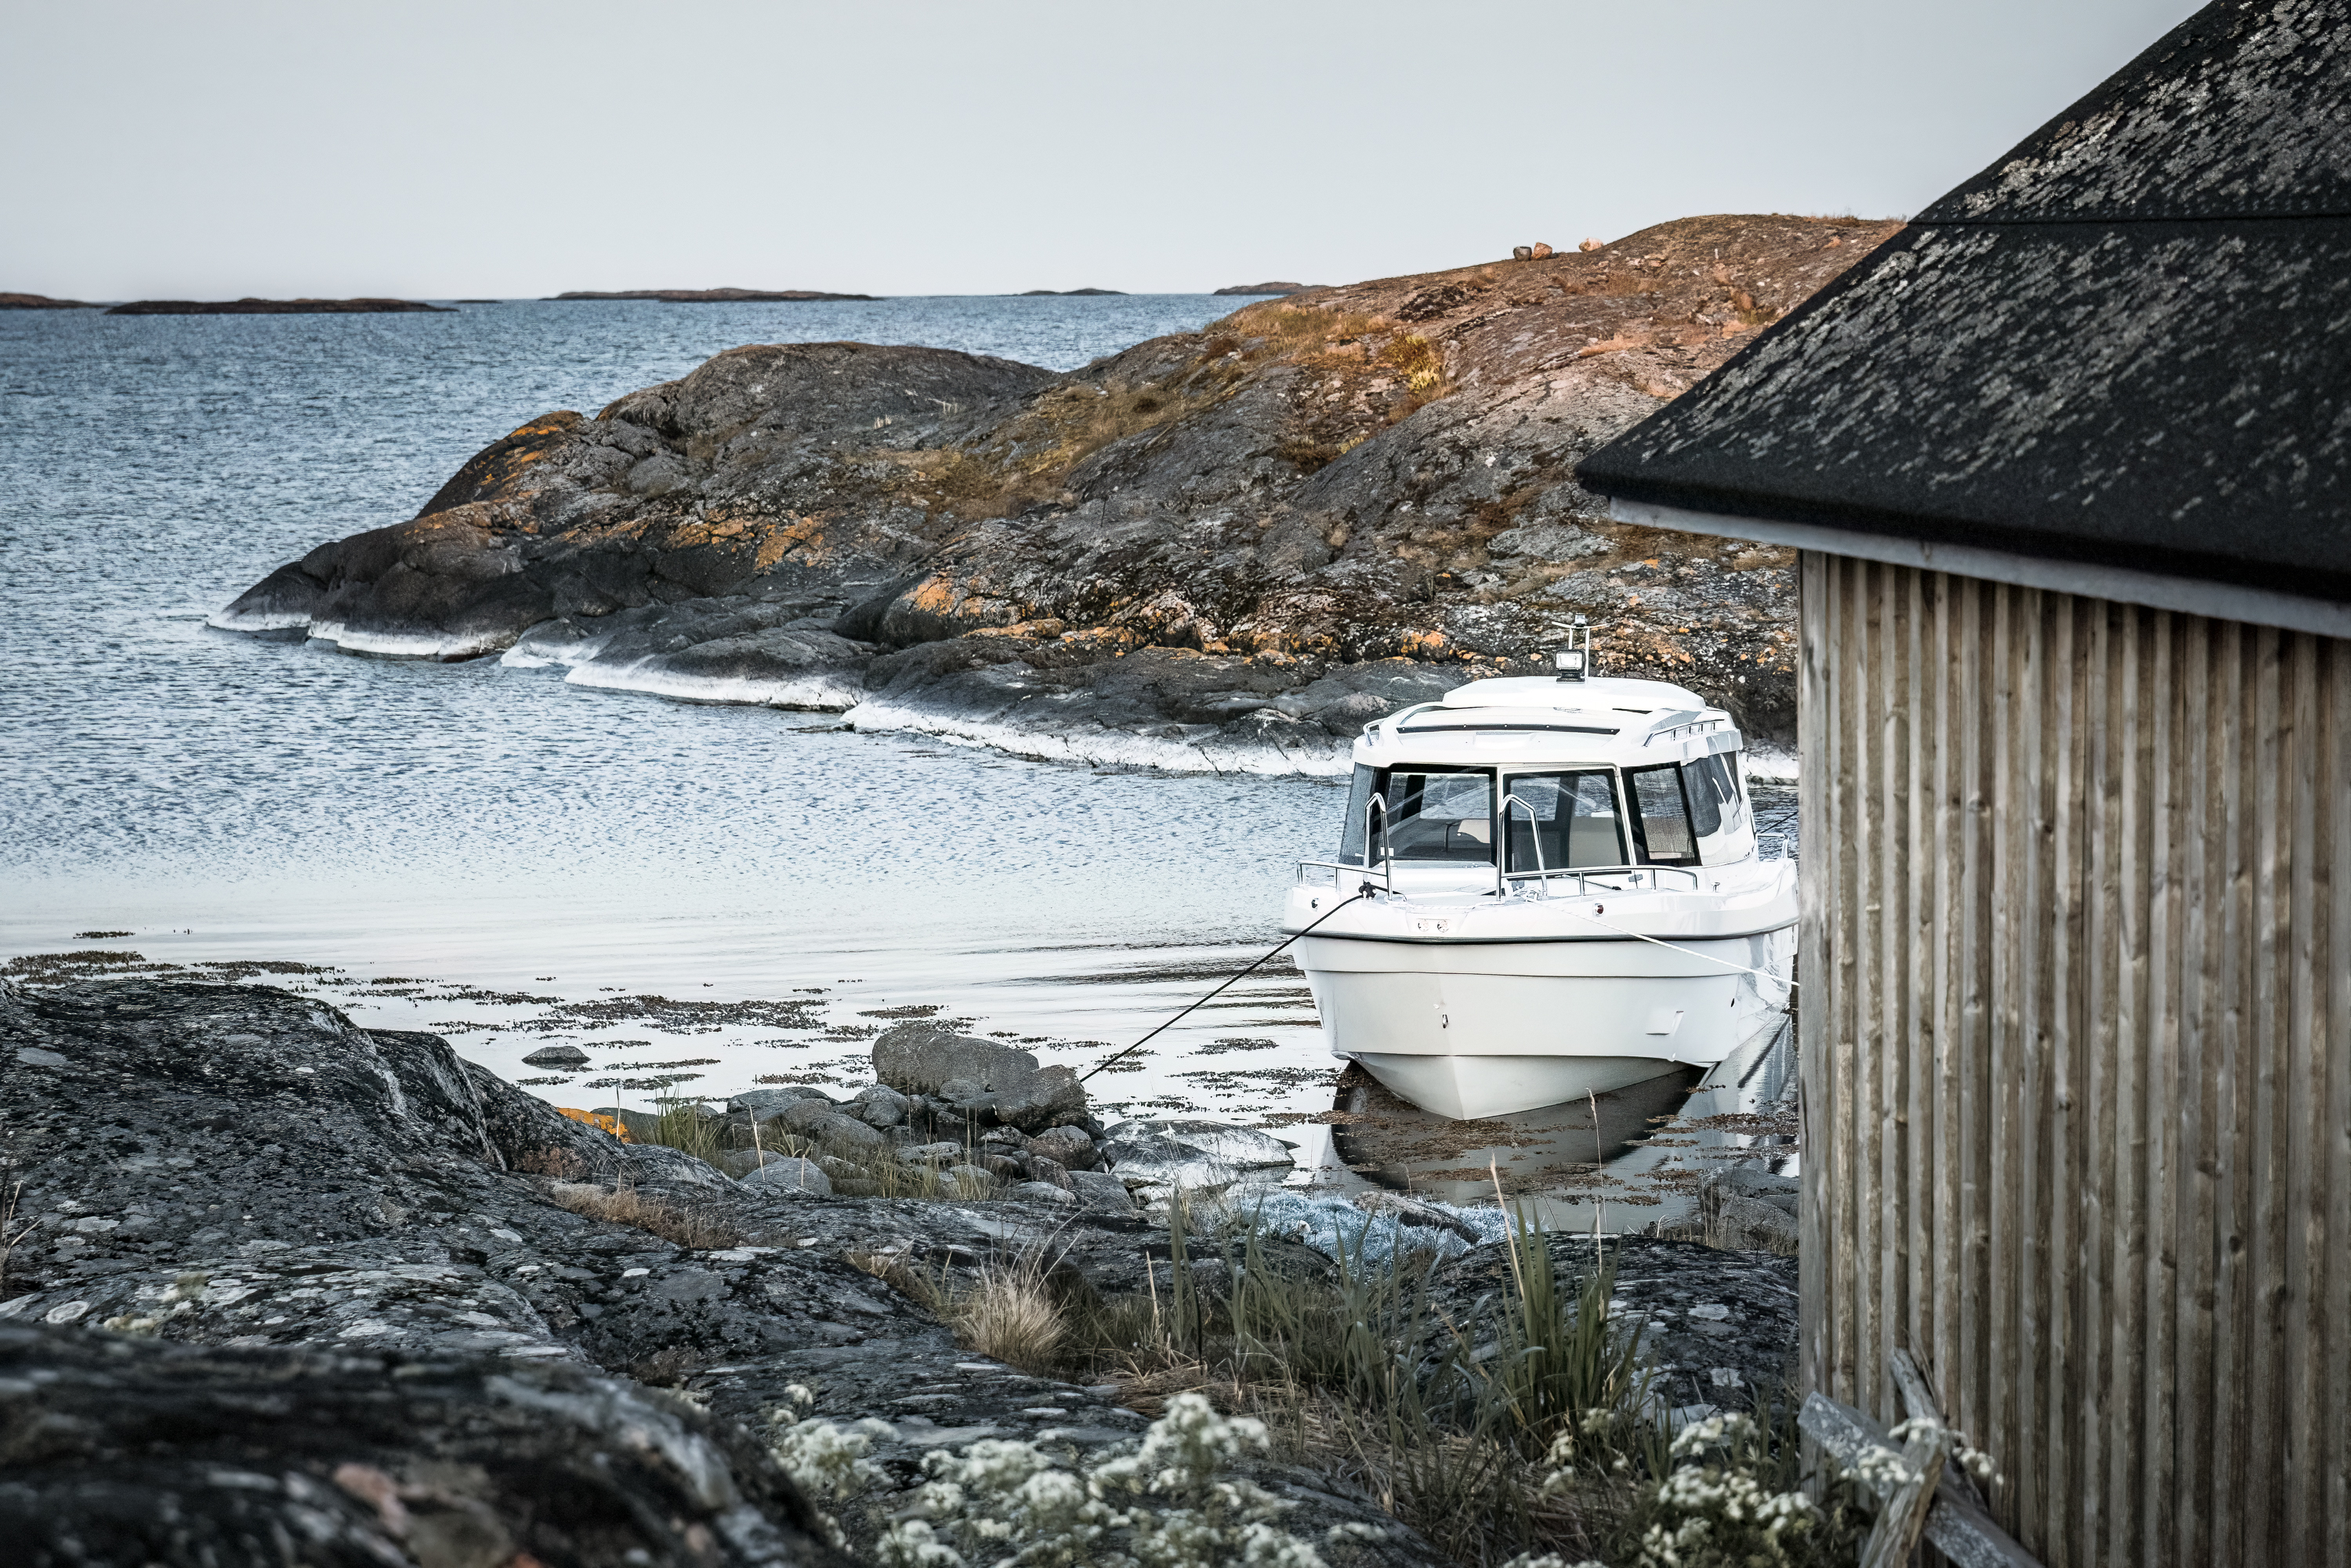 TG 7.9 cabin boat in the outer archipelago. In the foreground an old fishing hut, beautiful low sea cliffs and open sea in the background.